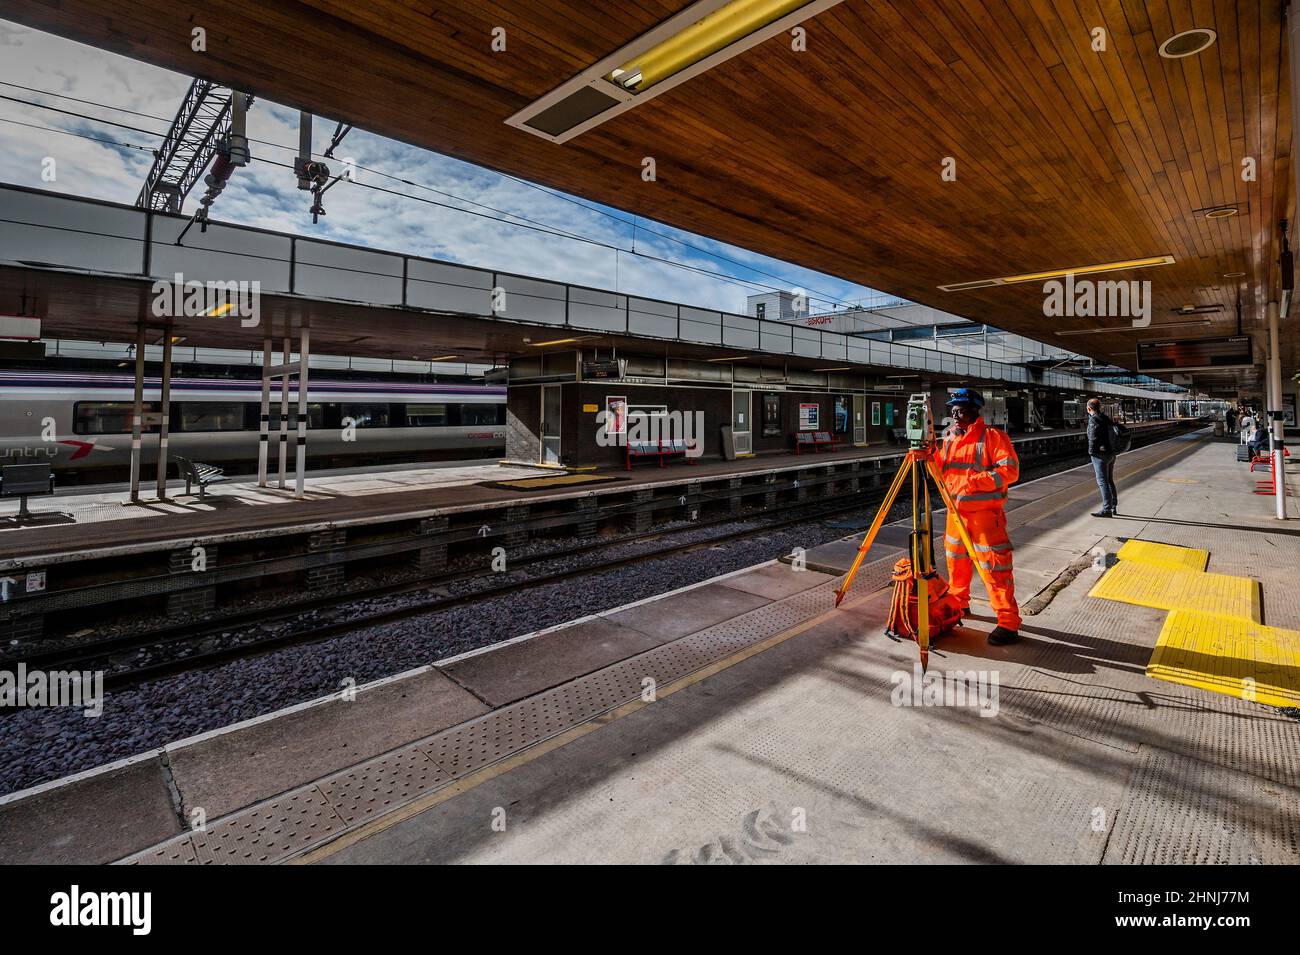 London, UK. 17th Feb, 2022. The new station takes shape - Coventry is UK City of Culture and has been flagged negatively inb a speech by Keir Starmer, Labour Leader. Credit: Guy Bell/Alamy Live News Stock Photo